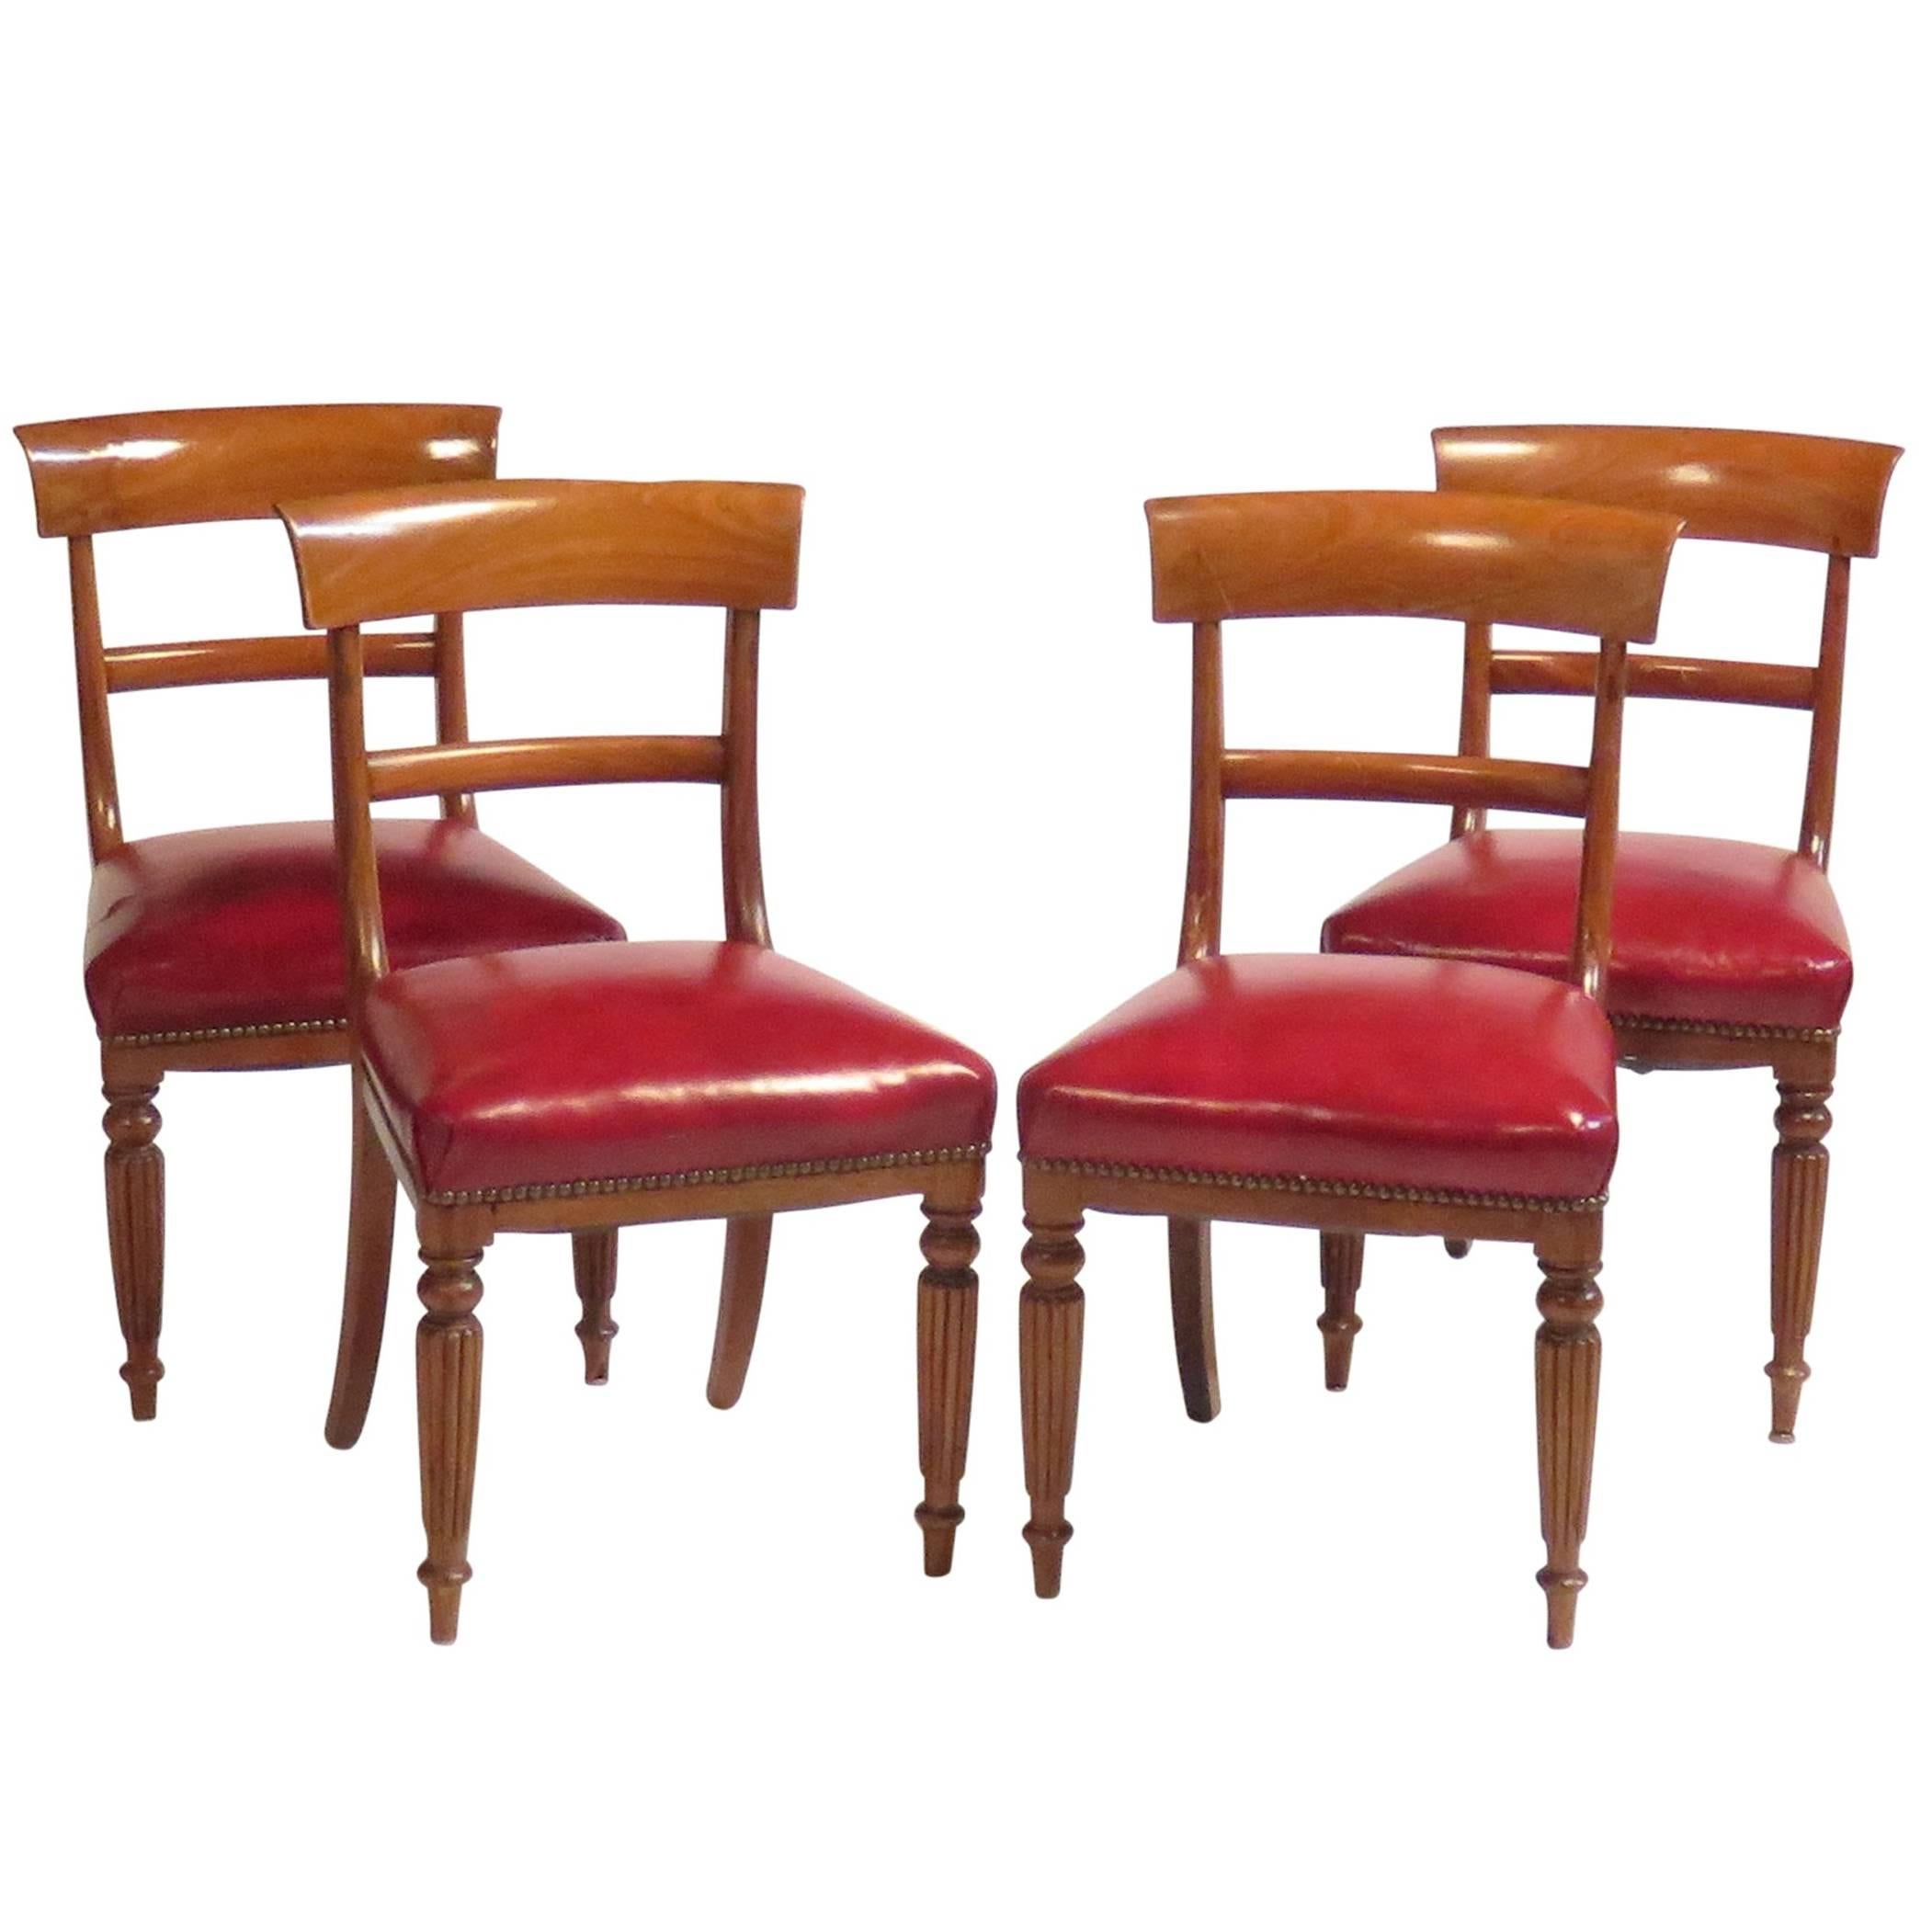 Set of Four Regency Side Chairs, circa 1820